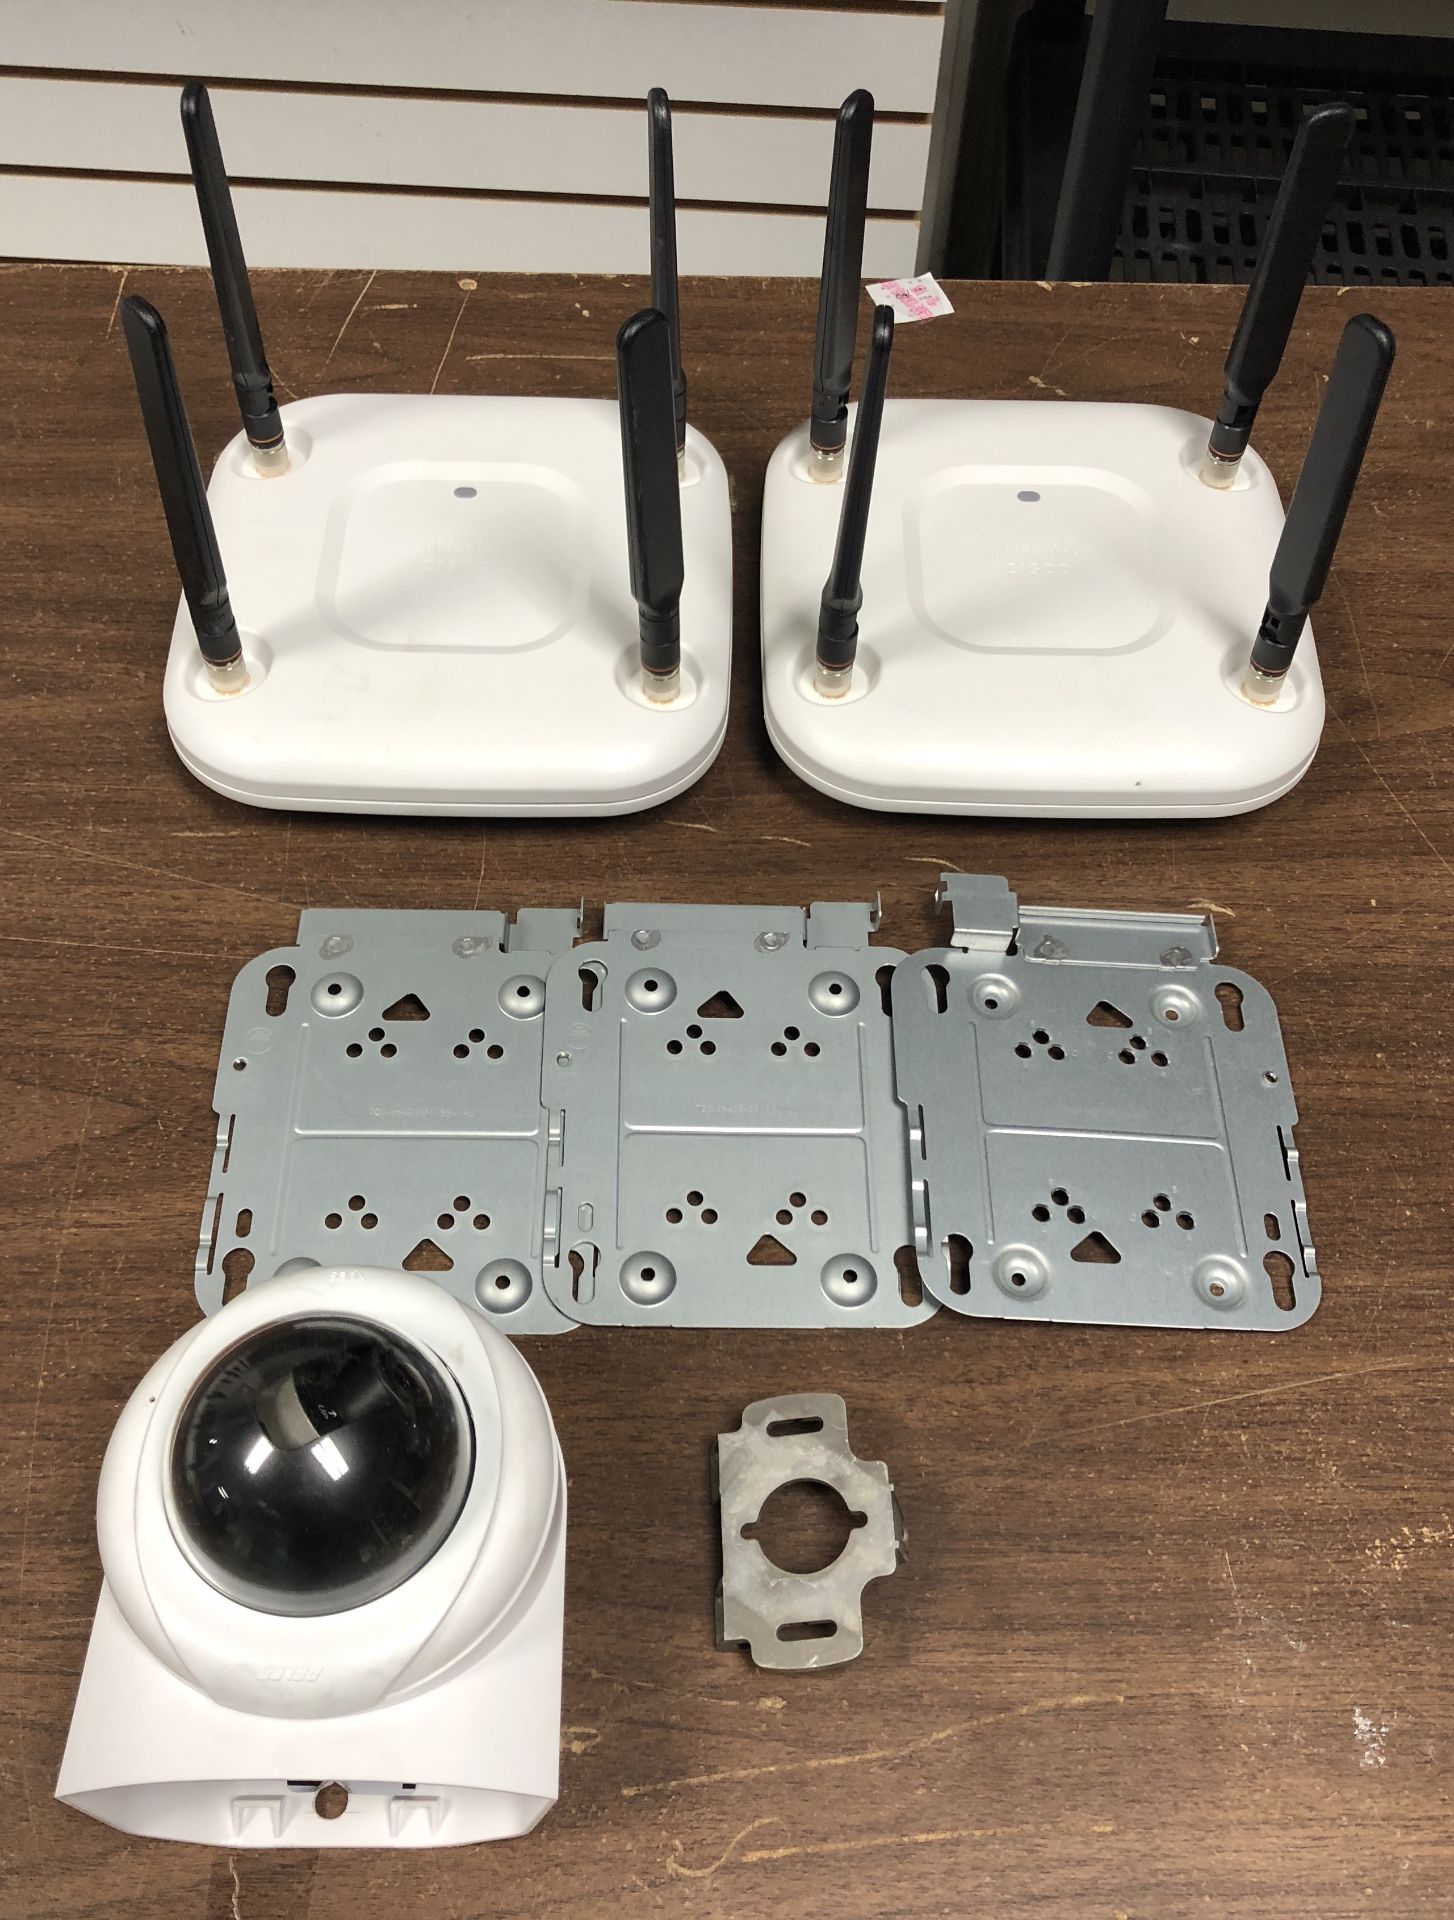 2 x Cisco 802.11ac CAP Ext Ant MPN: AIR-CAP2702E-A-K9 + 360 degree camera with all mounting brackets